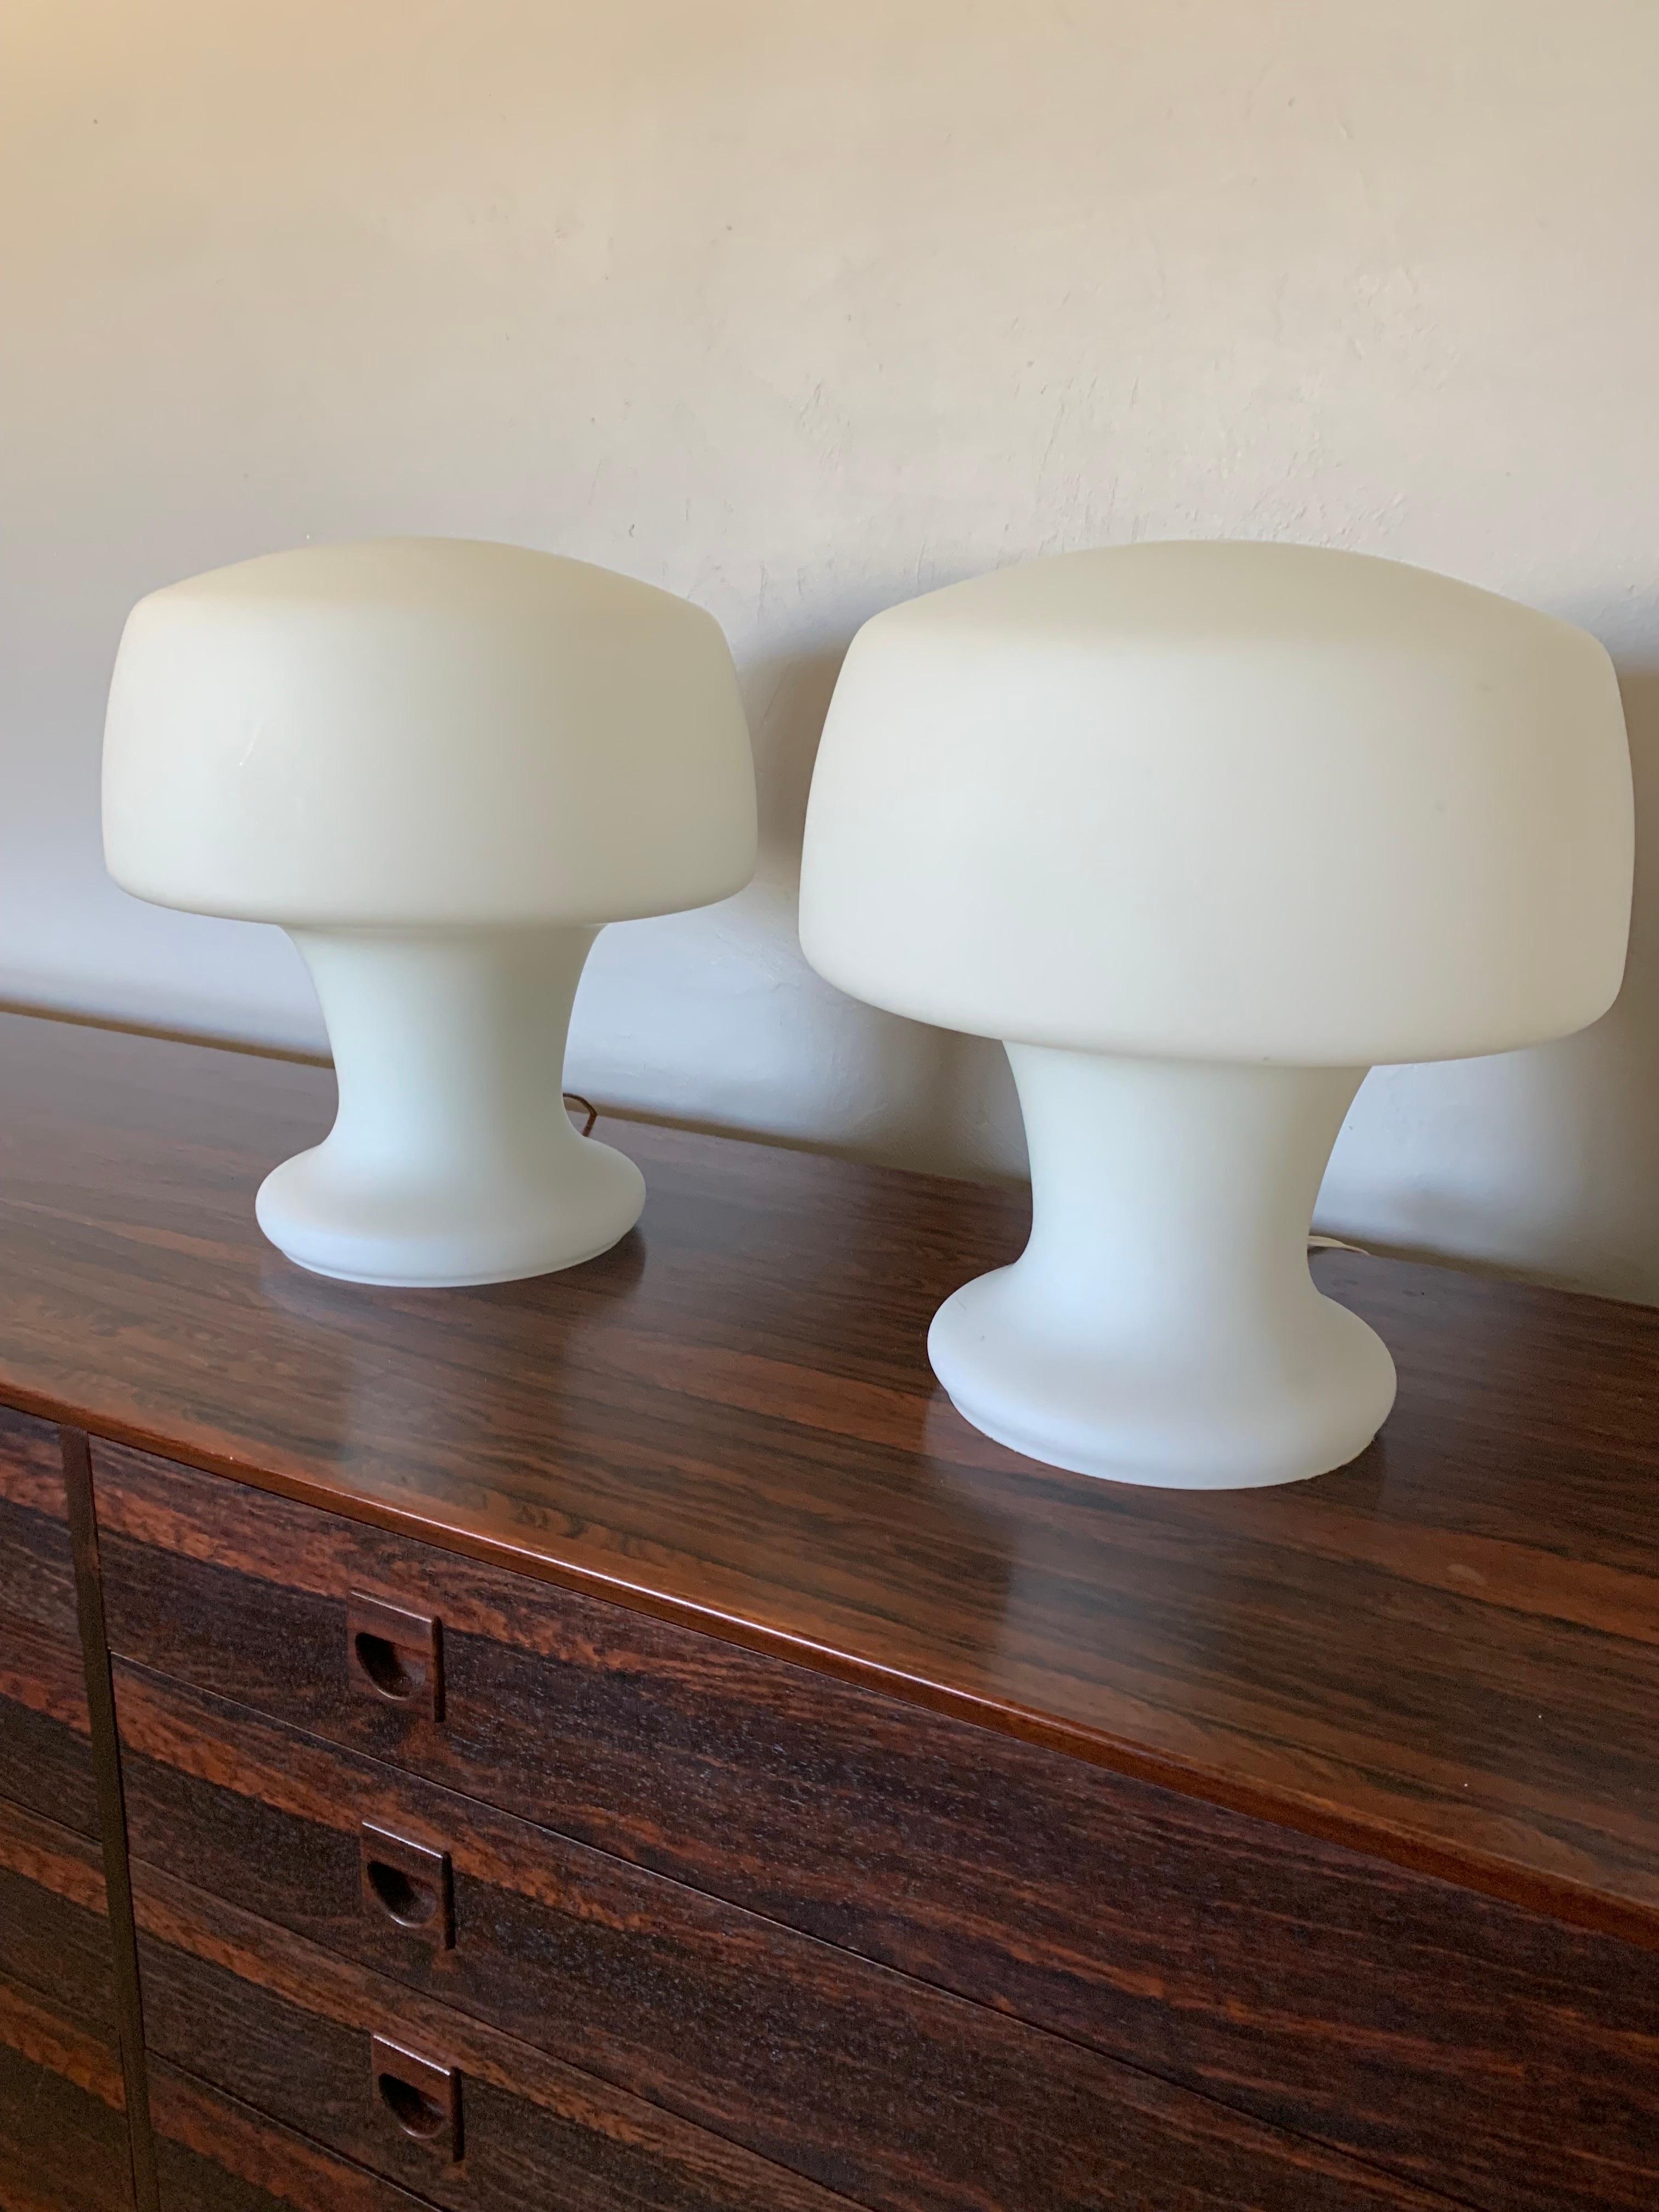 Fantastic pair of Laurel studio mushroom table lamps. Hand Blown opaque white glass forms a unique sculptural mushroom shape. Made from on solid piece of glass with a cord and switch to turn it on and off. True vintage piece. 

Mid century modern in